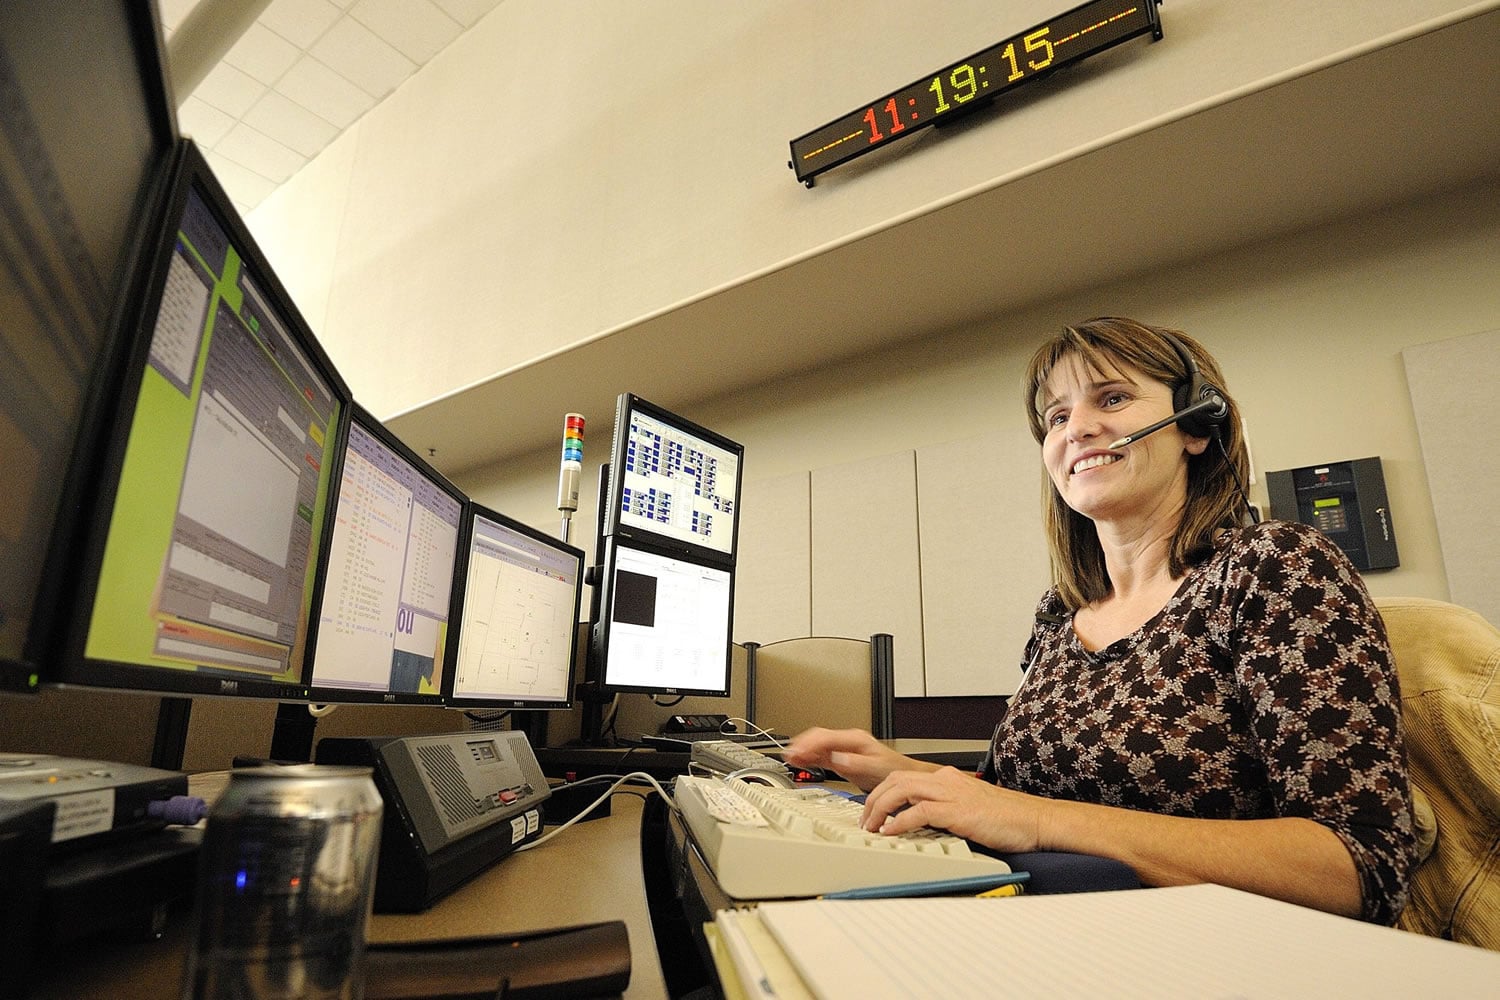 Jolee Mercer, a Clark Regional Emergency Services Agency dispatcher, Tuesday handles calls for the Clark County Sheriff's Office, BNSF Railway, and the police forces of Camas, Washougal, Ridgefield, La Center and Battle Ground.